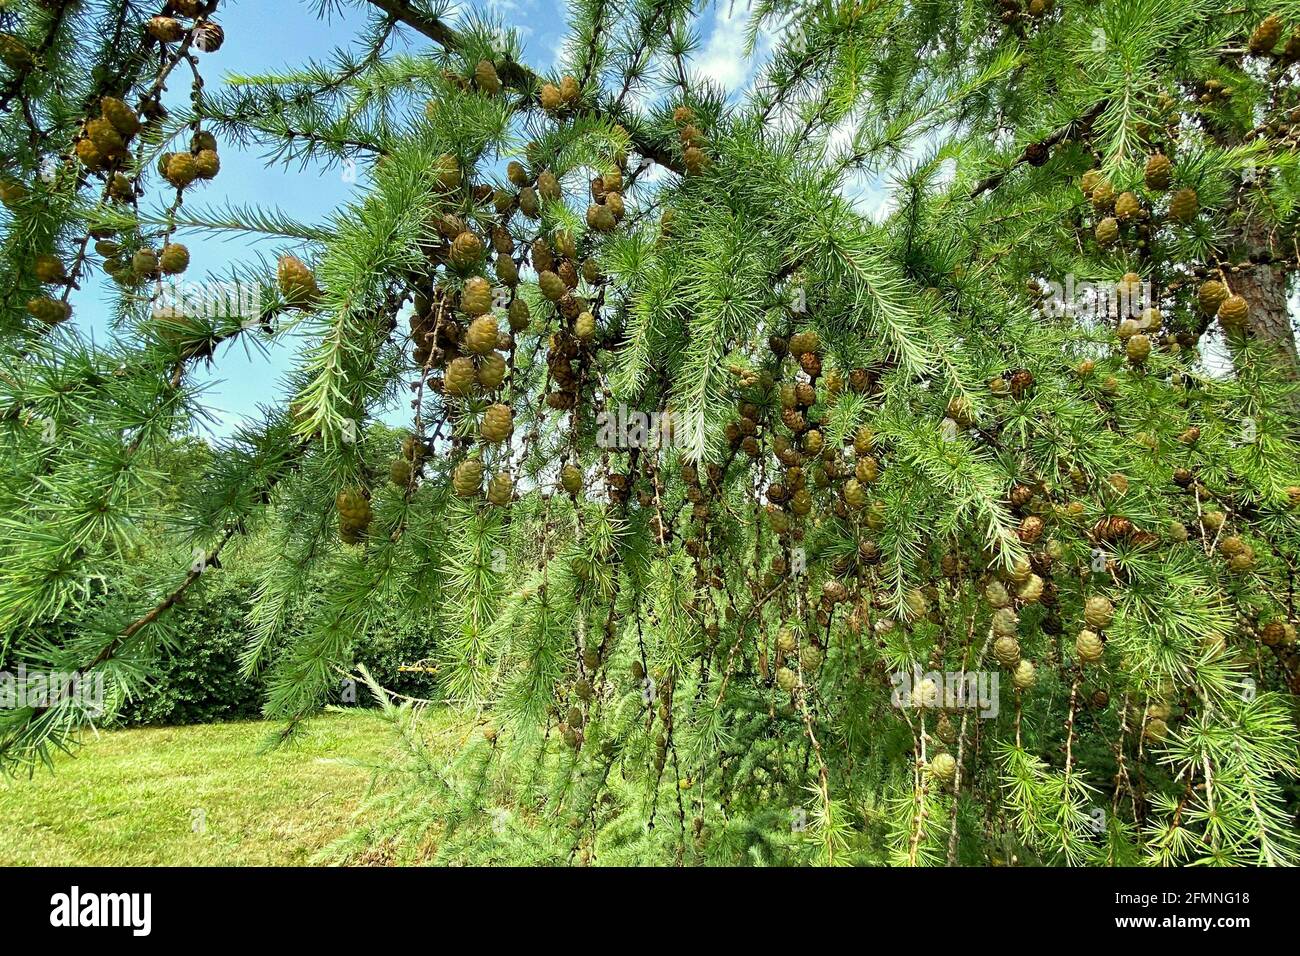 Christmas tree Abies in evergreen landscaped garden. Cones on branches of Abies tree, closeup. Clear sunny day. Stock Photo